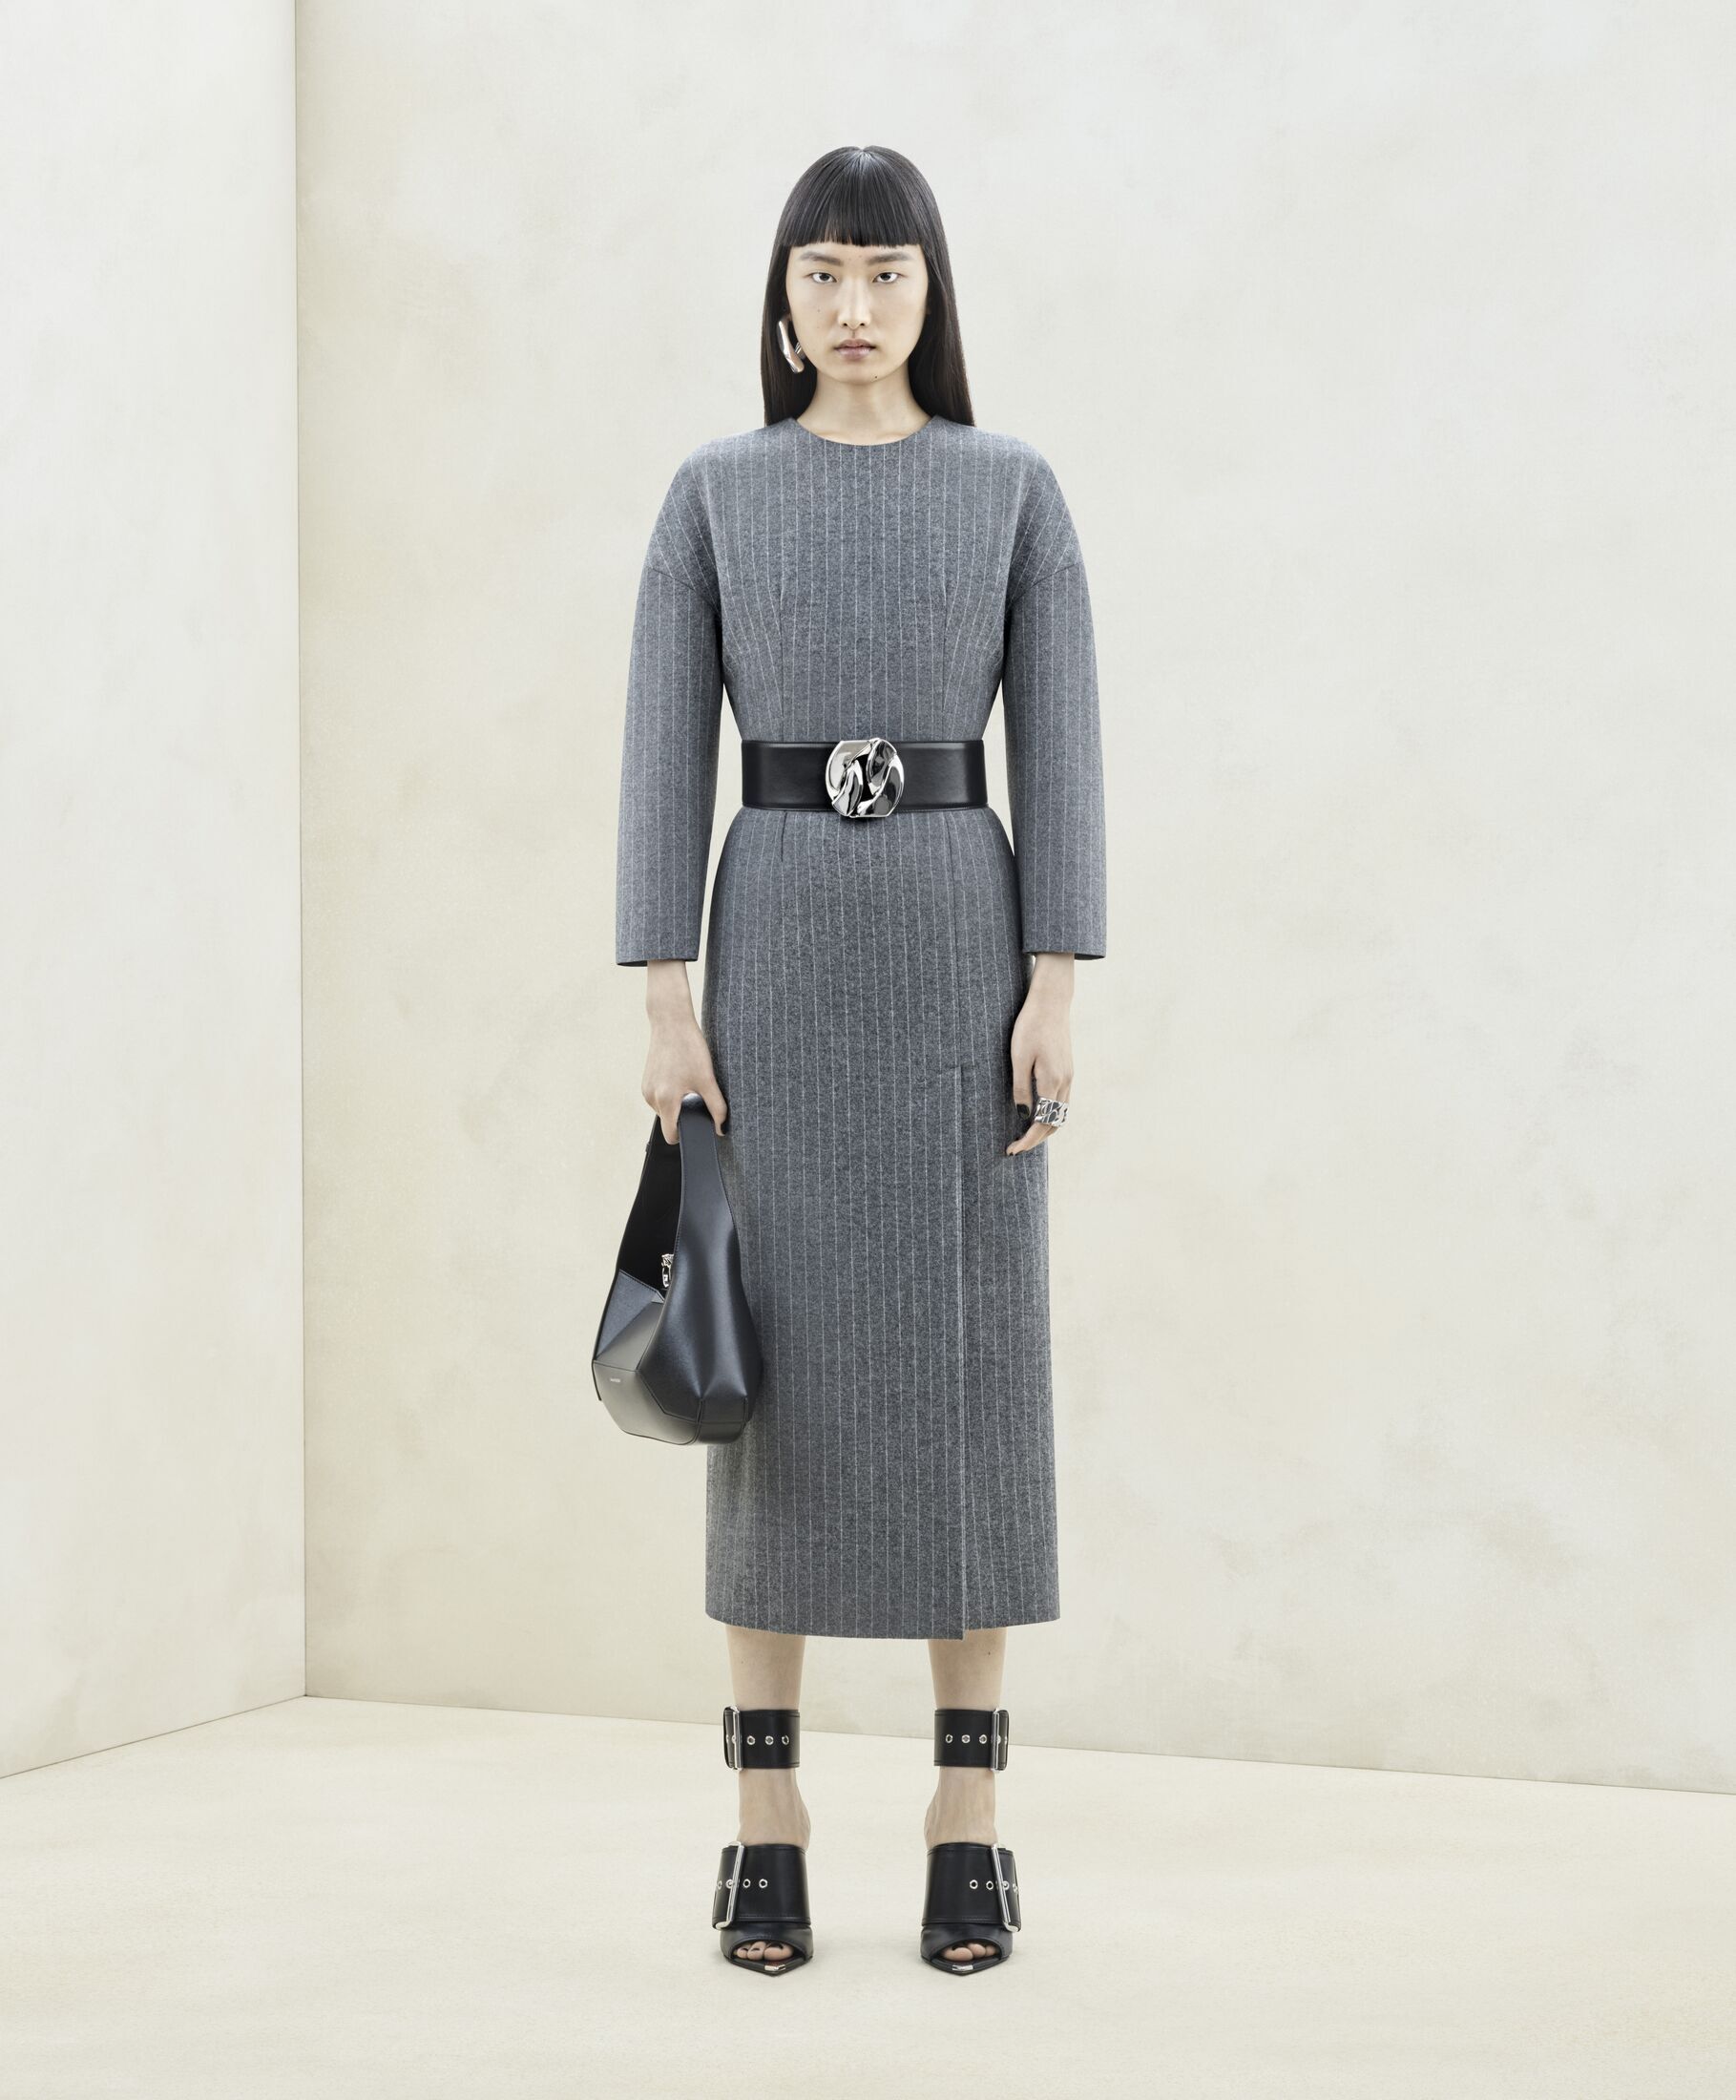 Page: Collection > AW23 > Looks > Grid > Look 8